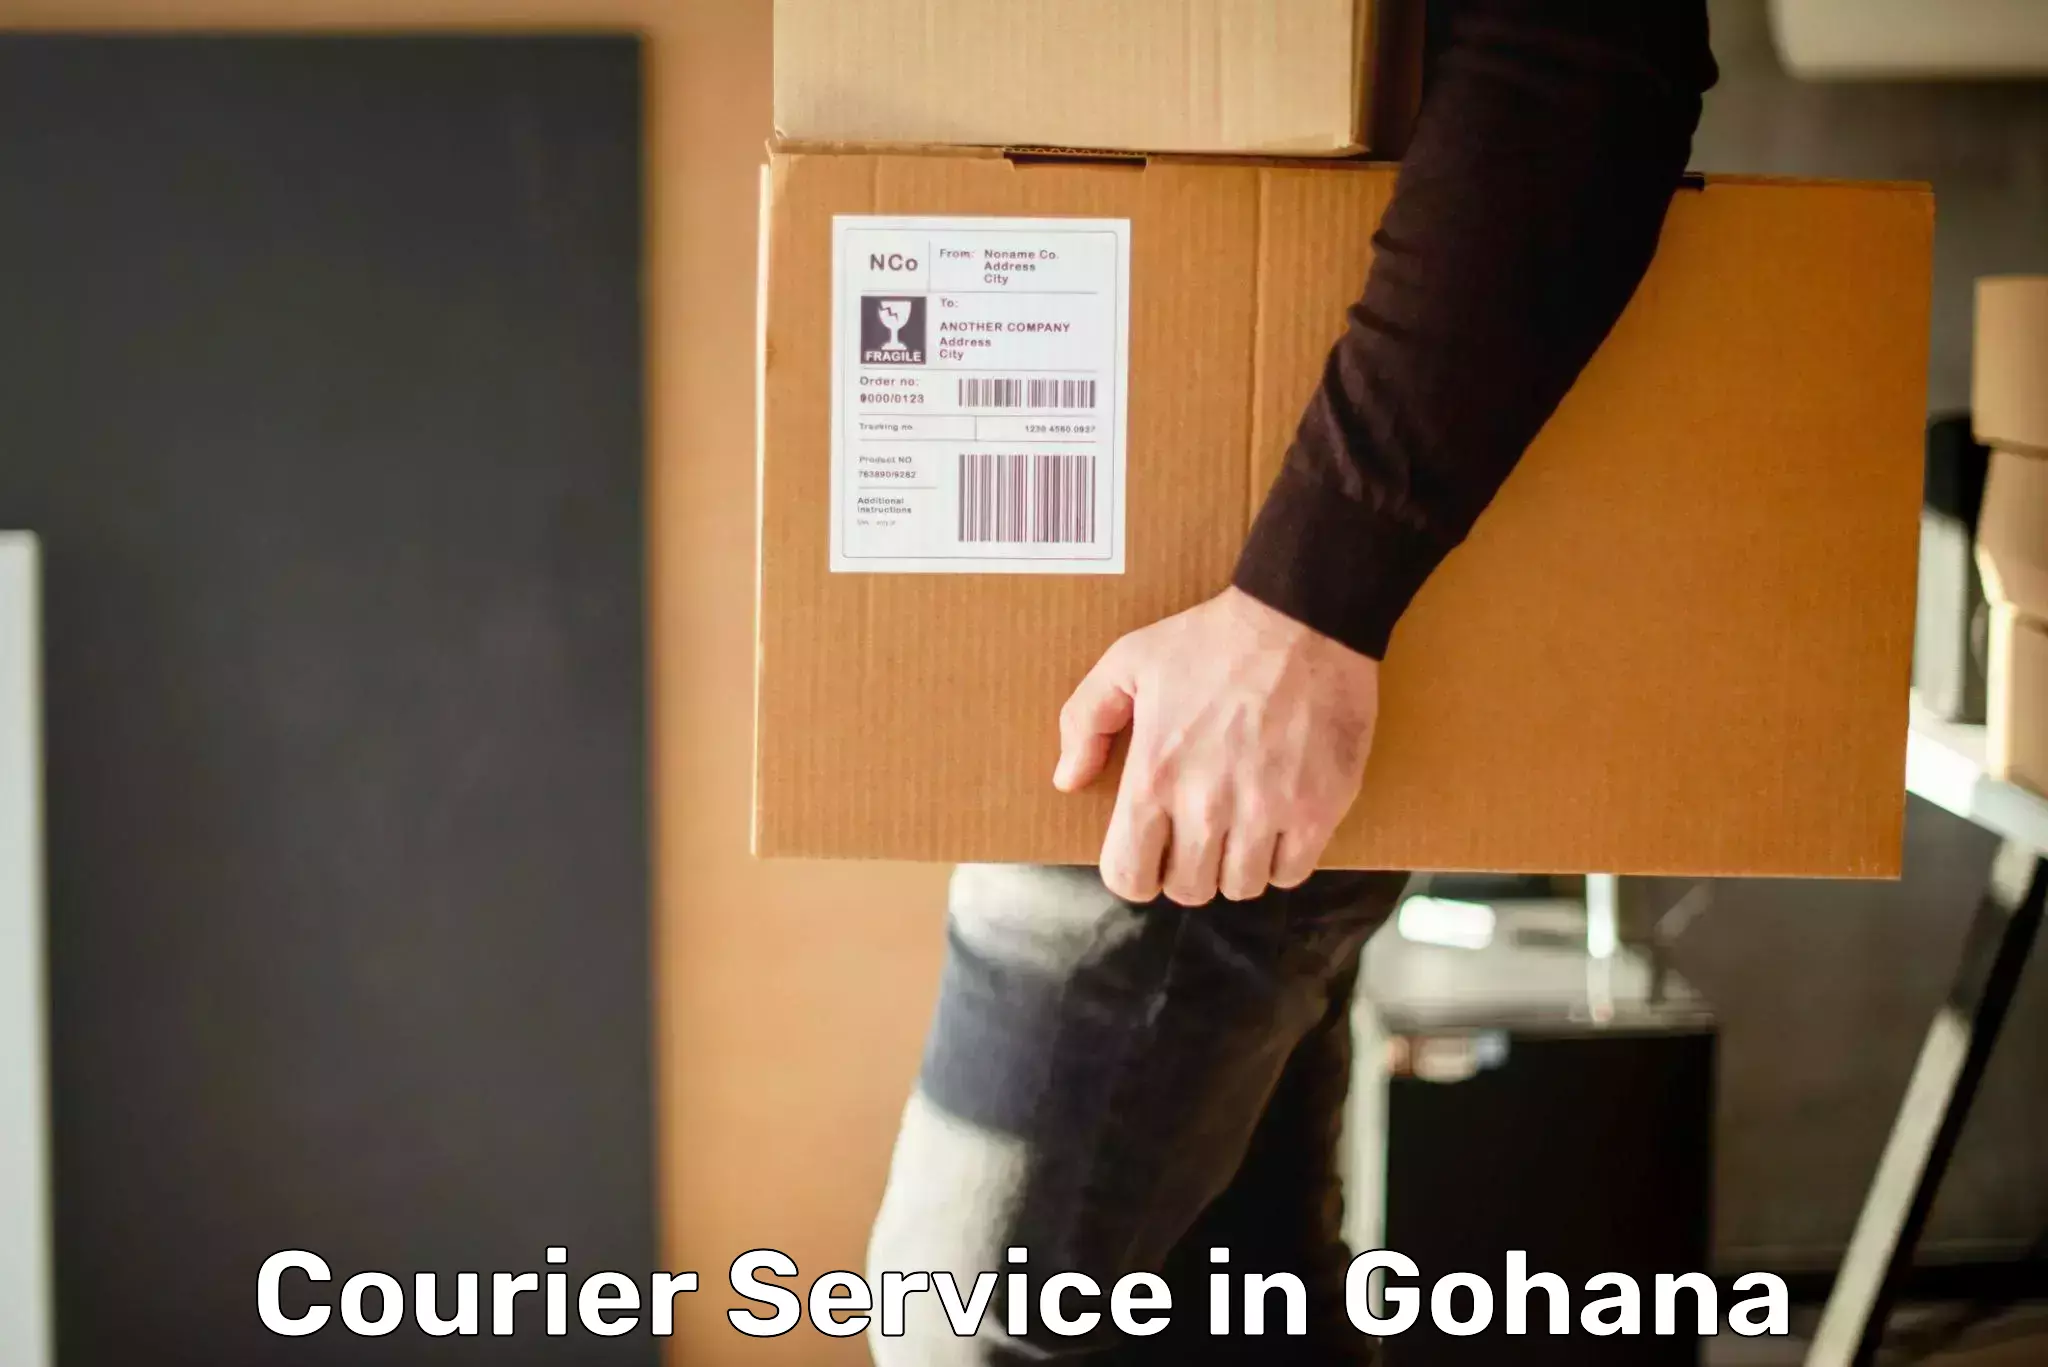 Rapid shipping services in Gohana